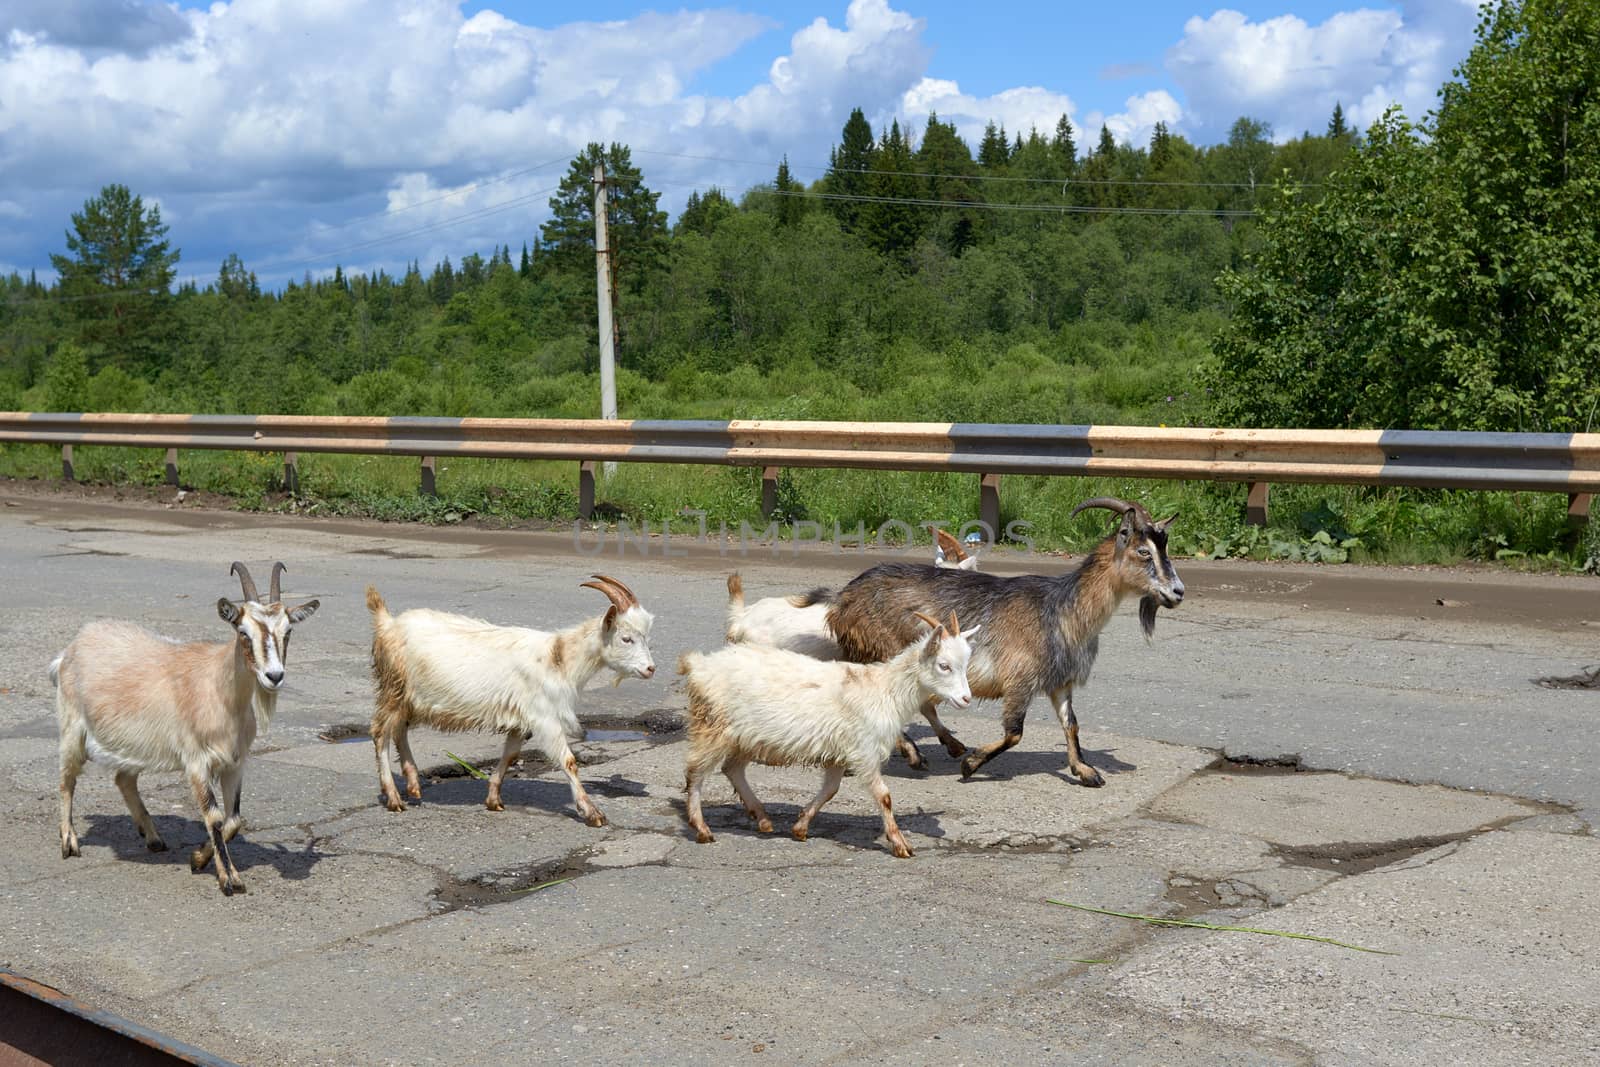 Large and small goats are on the bumpy road by vladali